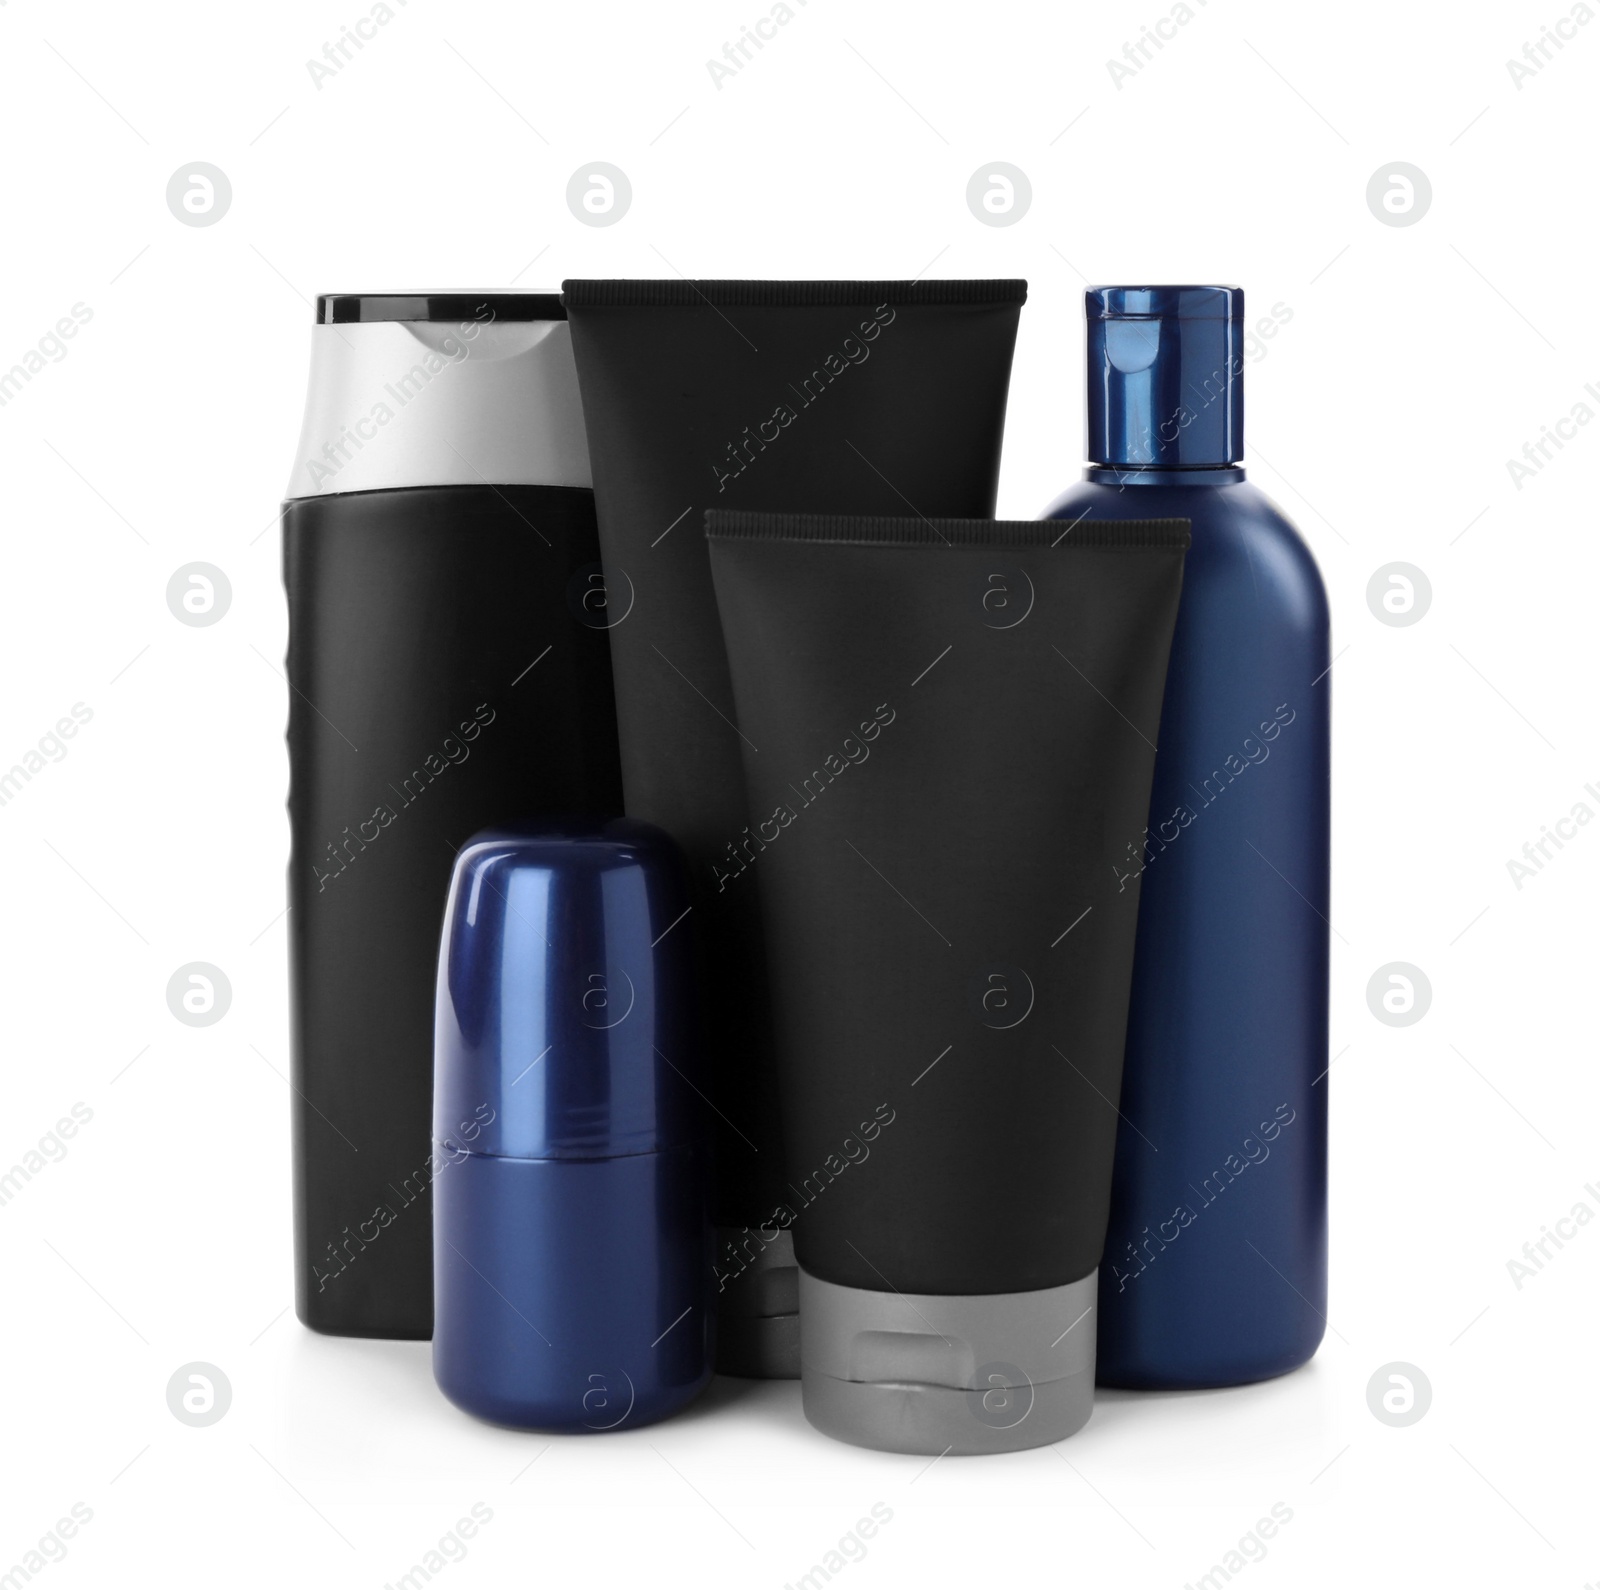 Photo of Set of men's cosmetic products on white background